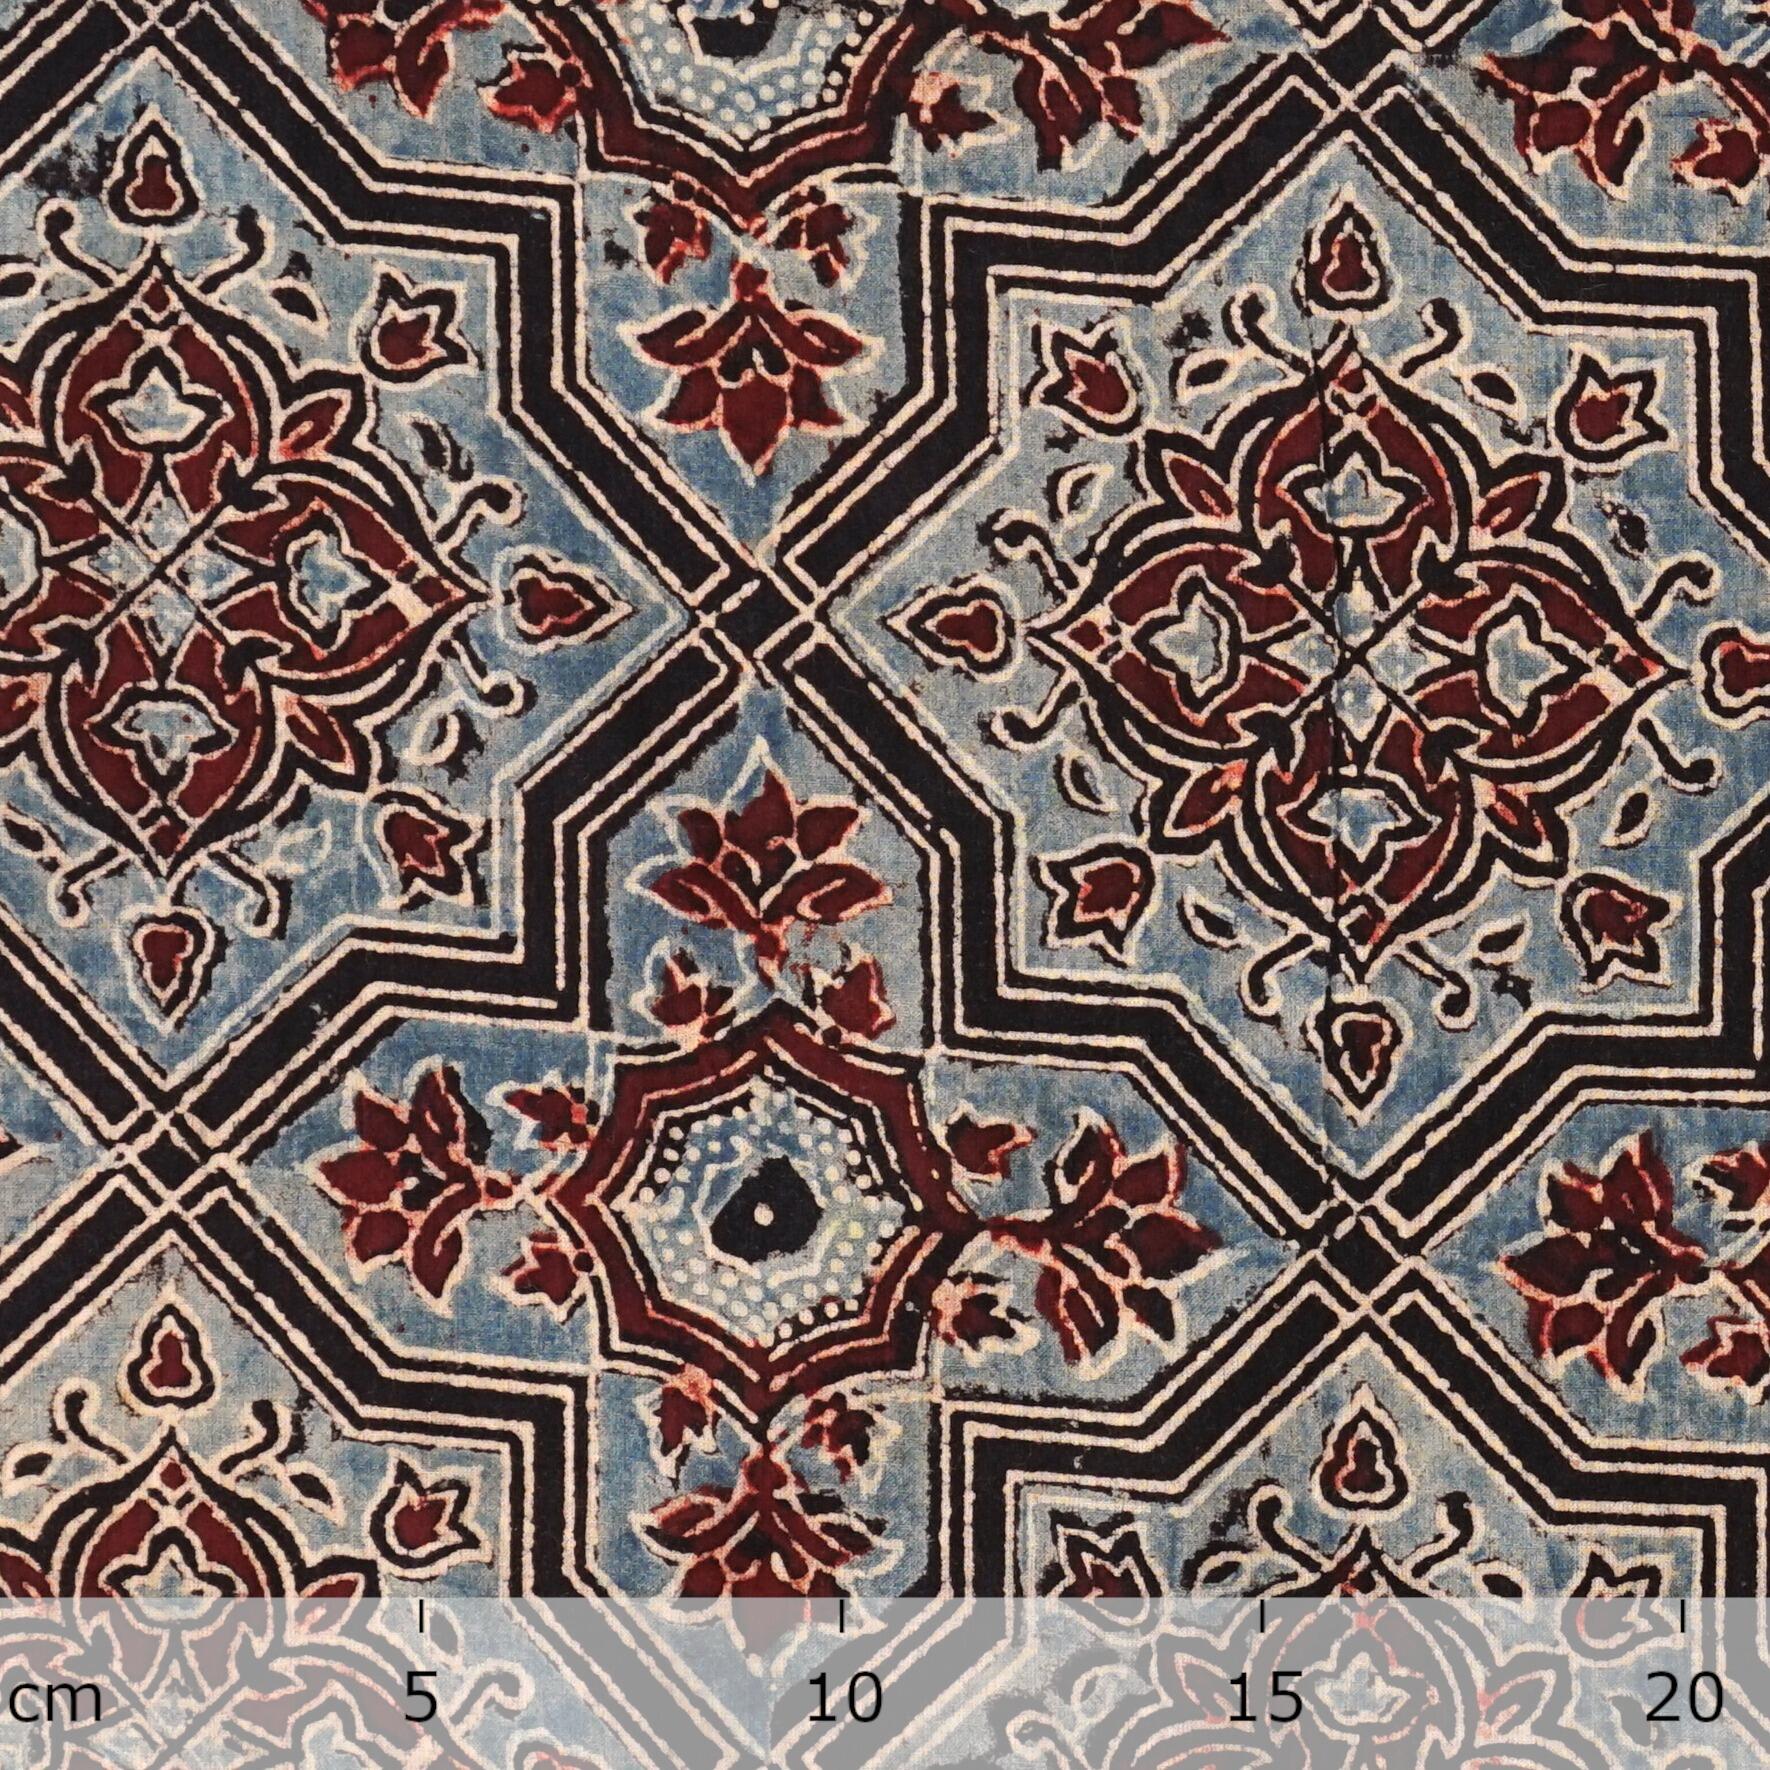 North Indian Block-Printed Cotton - Aaina Mahal Design - Alizarin Red, Indigo and Black Dyes - Ruler